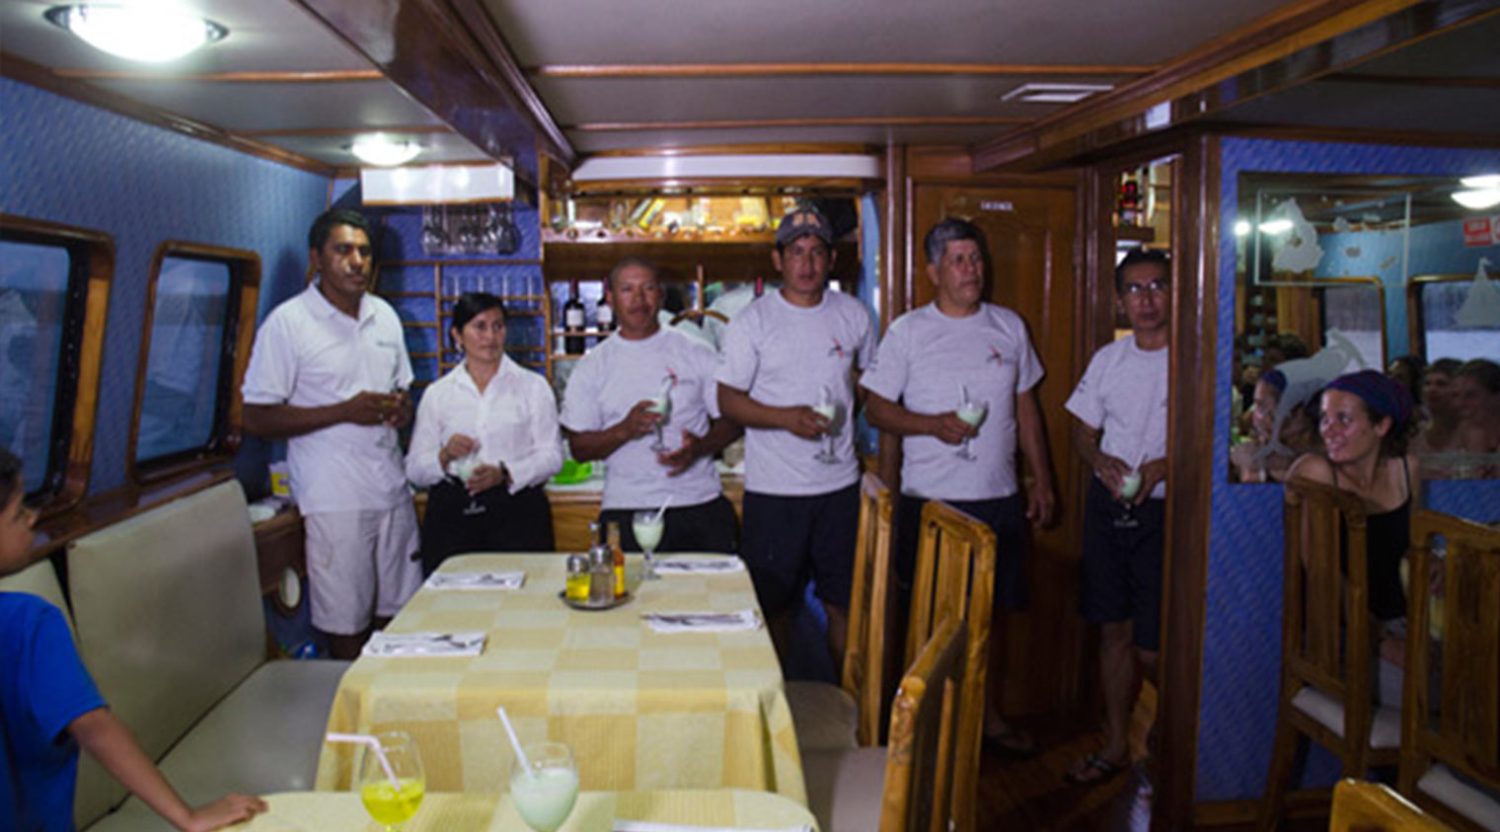 golondrina yacht crew in the dining room of galapagos islands